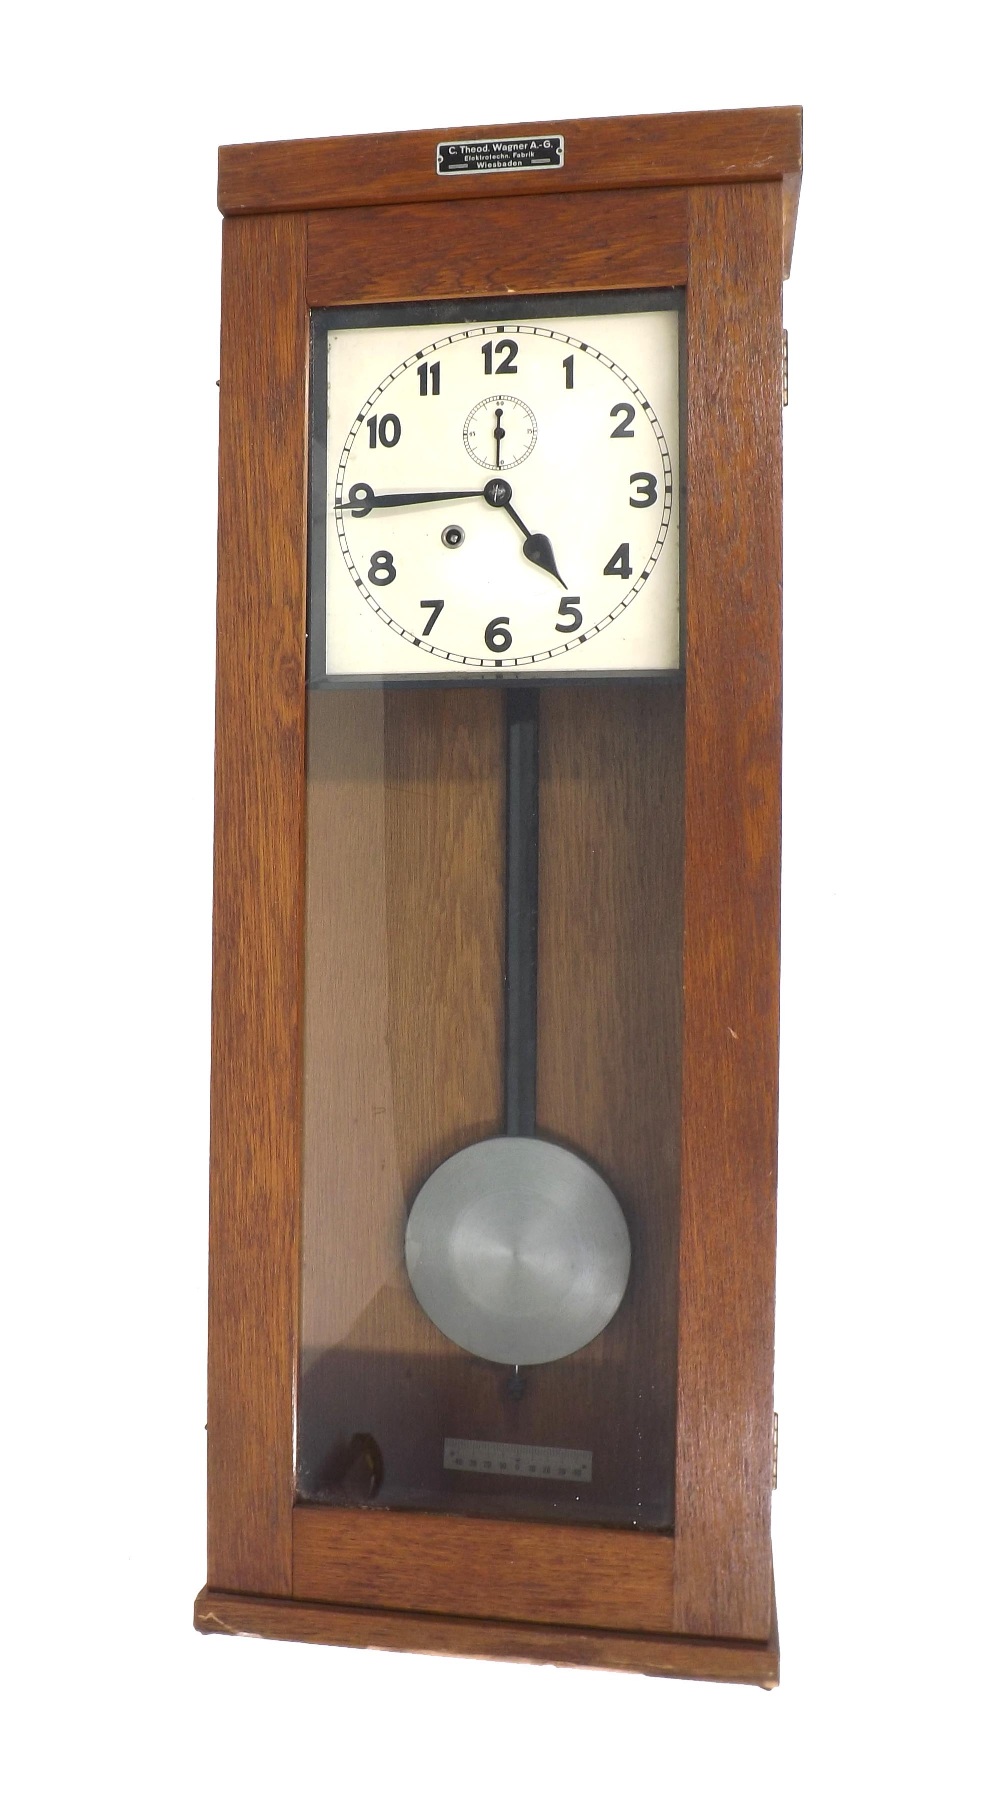 Two C. Theod. Wagner mechanical wall clocks with provision for contacts to operate electrical slaves - Image 2 of 5